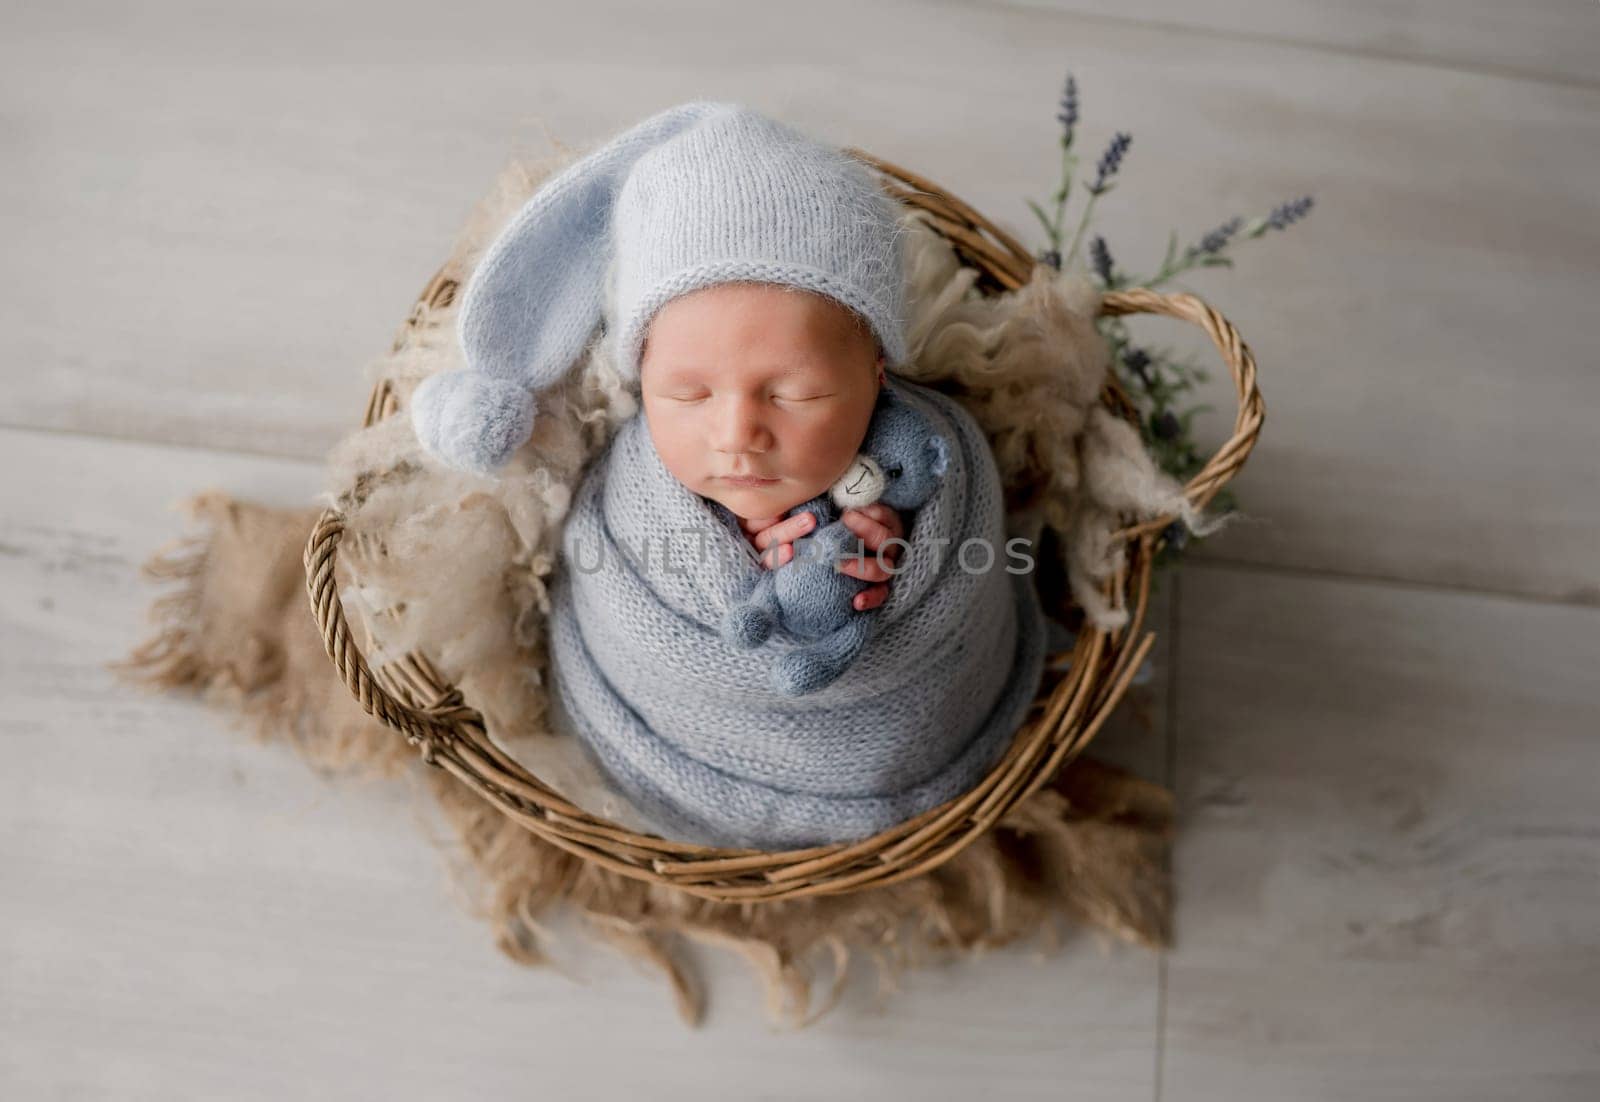 Adorable newborn baby boy swaddled in knitted blanket holding teddy bear toy and sleeping in basket studio portrait. Cute infant child kid napping